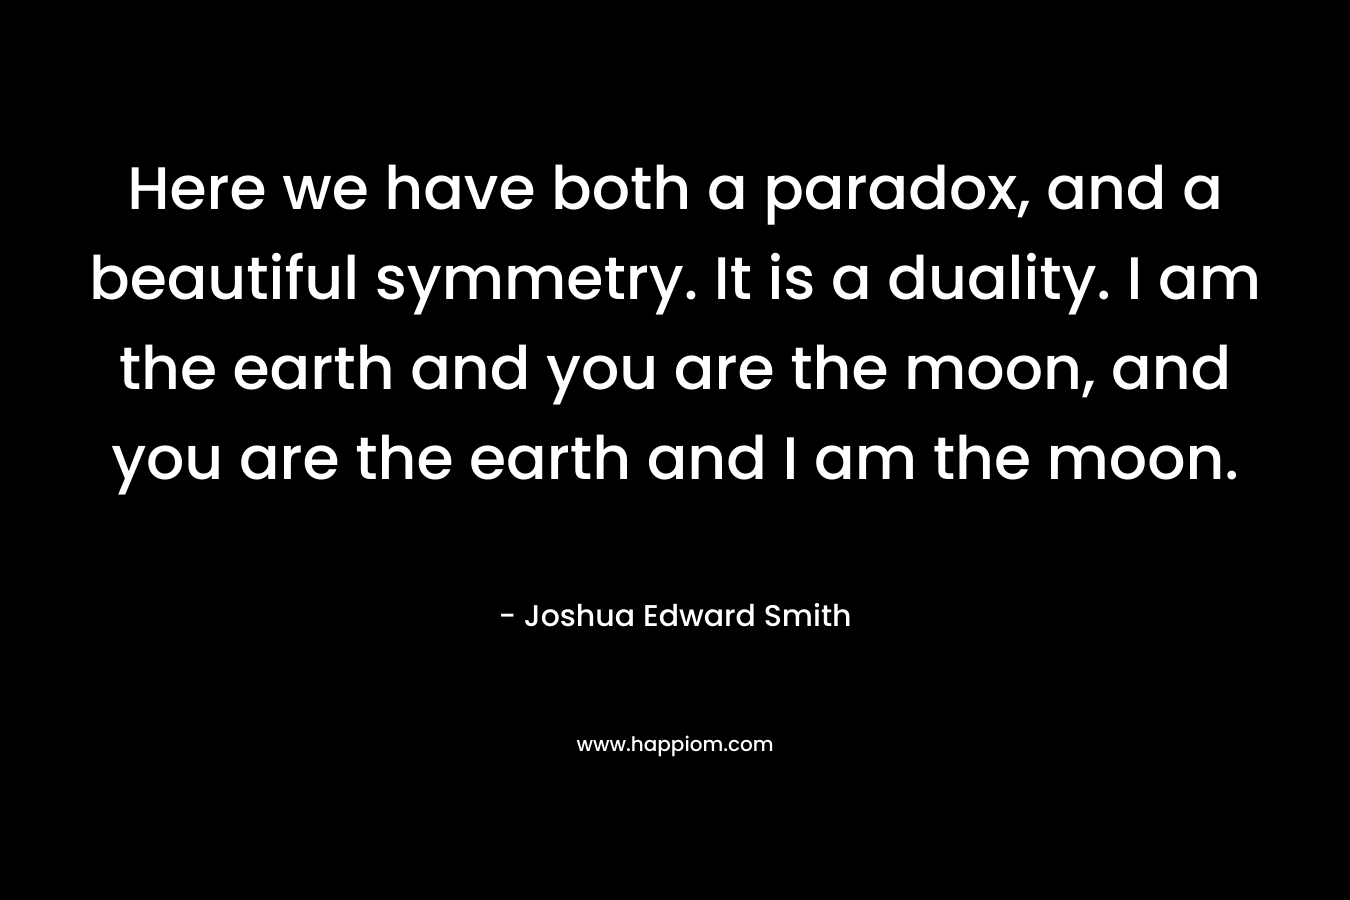 Here we have both a paradox, and a beautiful symmetry. It is a duality. I am the earth and you are the moon, and you are the earth and I am the moon. – Joshua Edward Smith